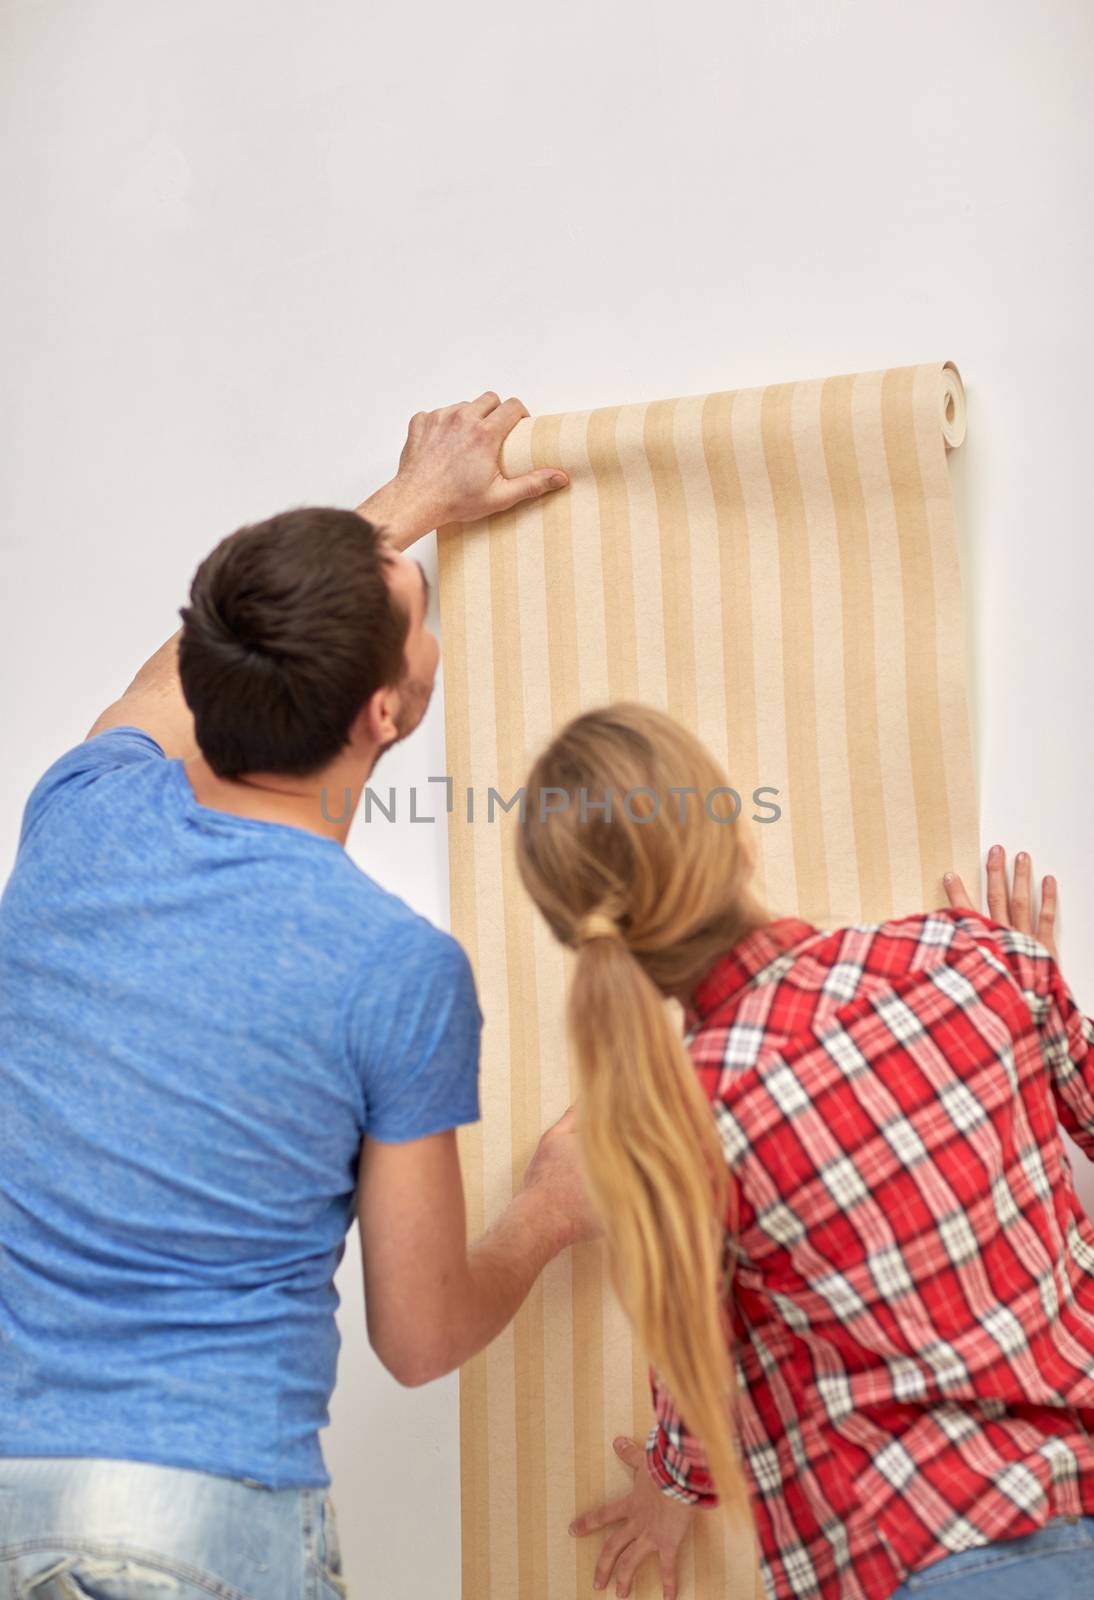 repair, renovation, building and people concept - close up of couple holding wallpaper at home